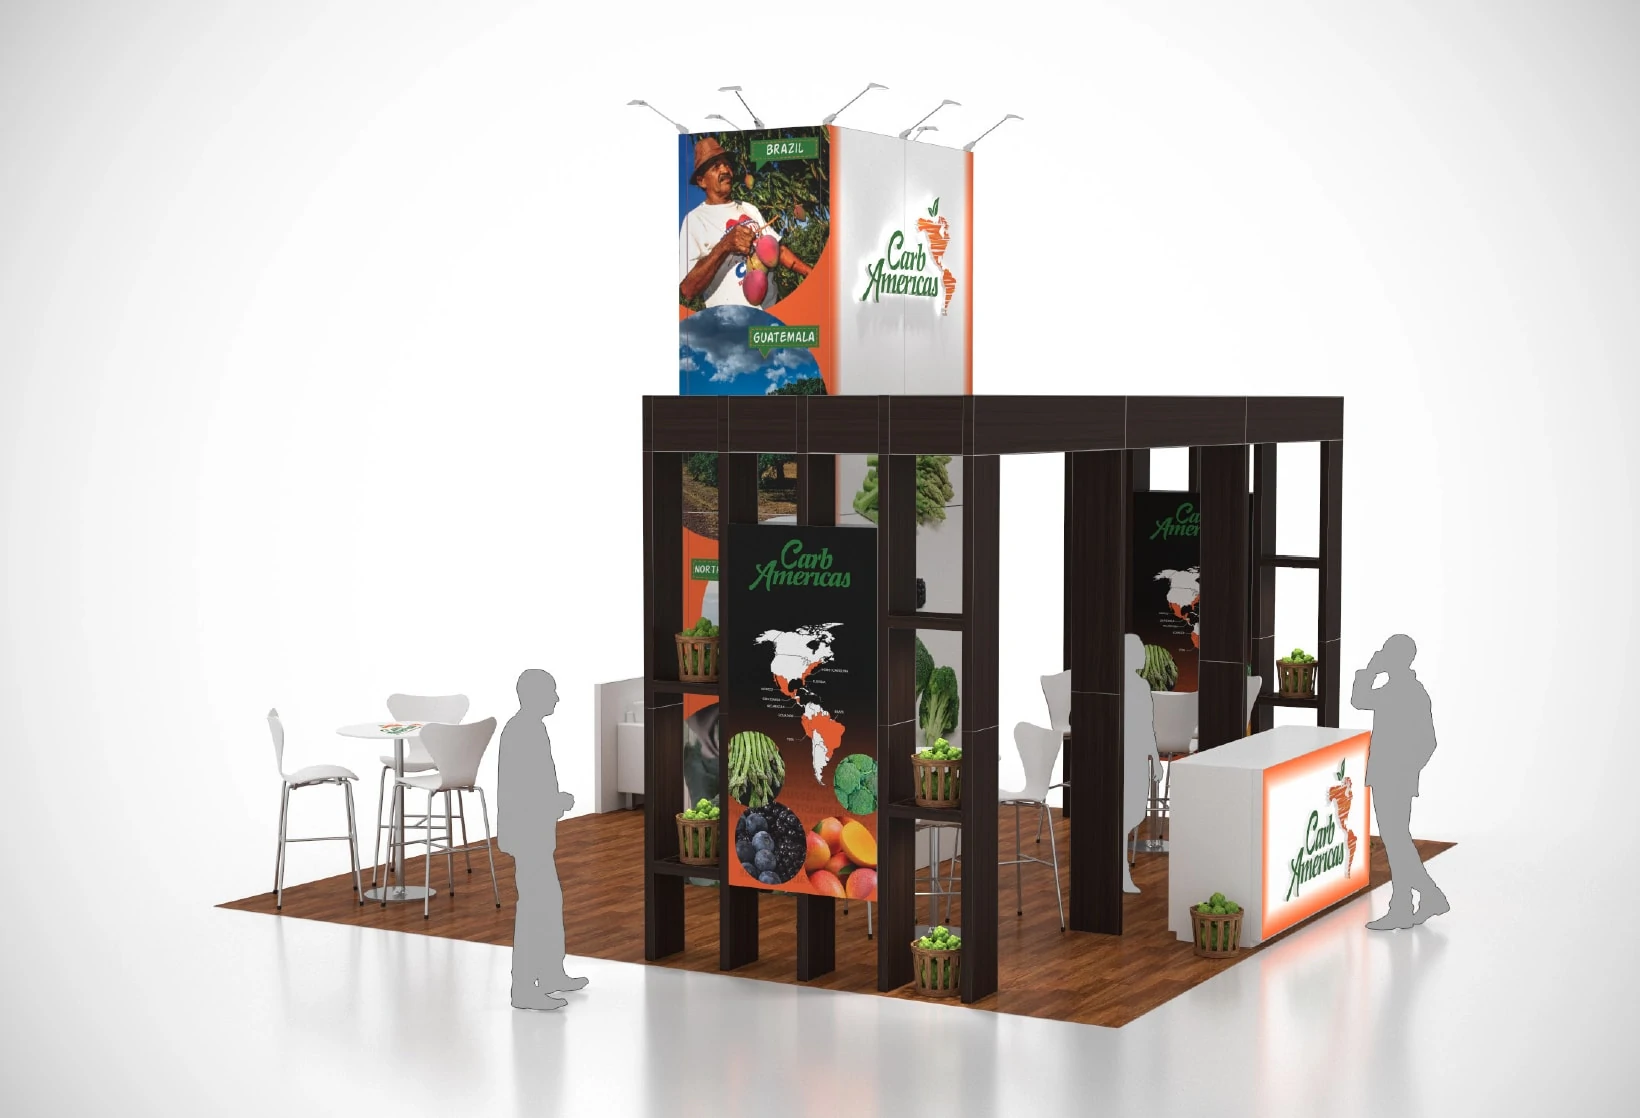 20 x 20 Food & Beverage Trade Show Booth Rental - Exhibit Experience